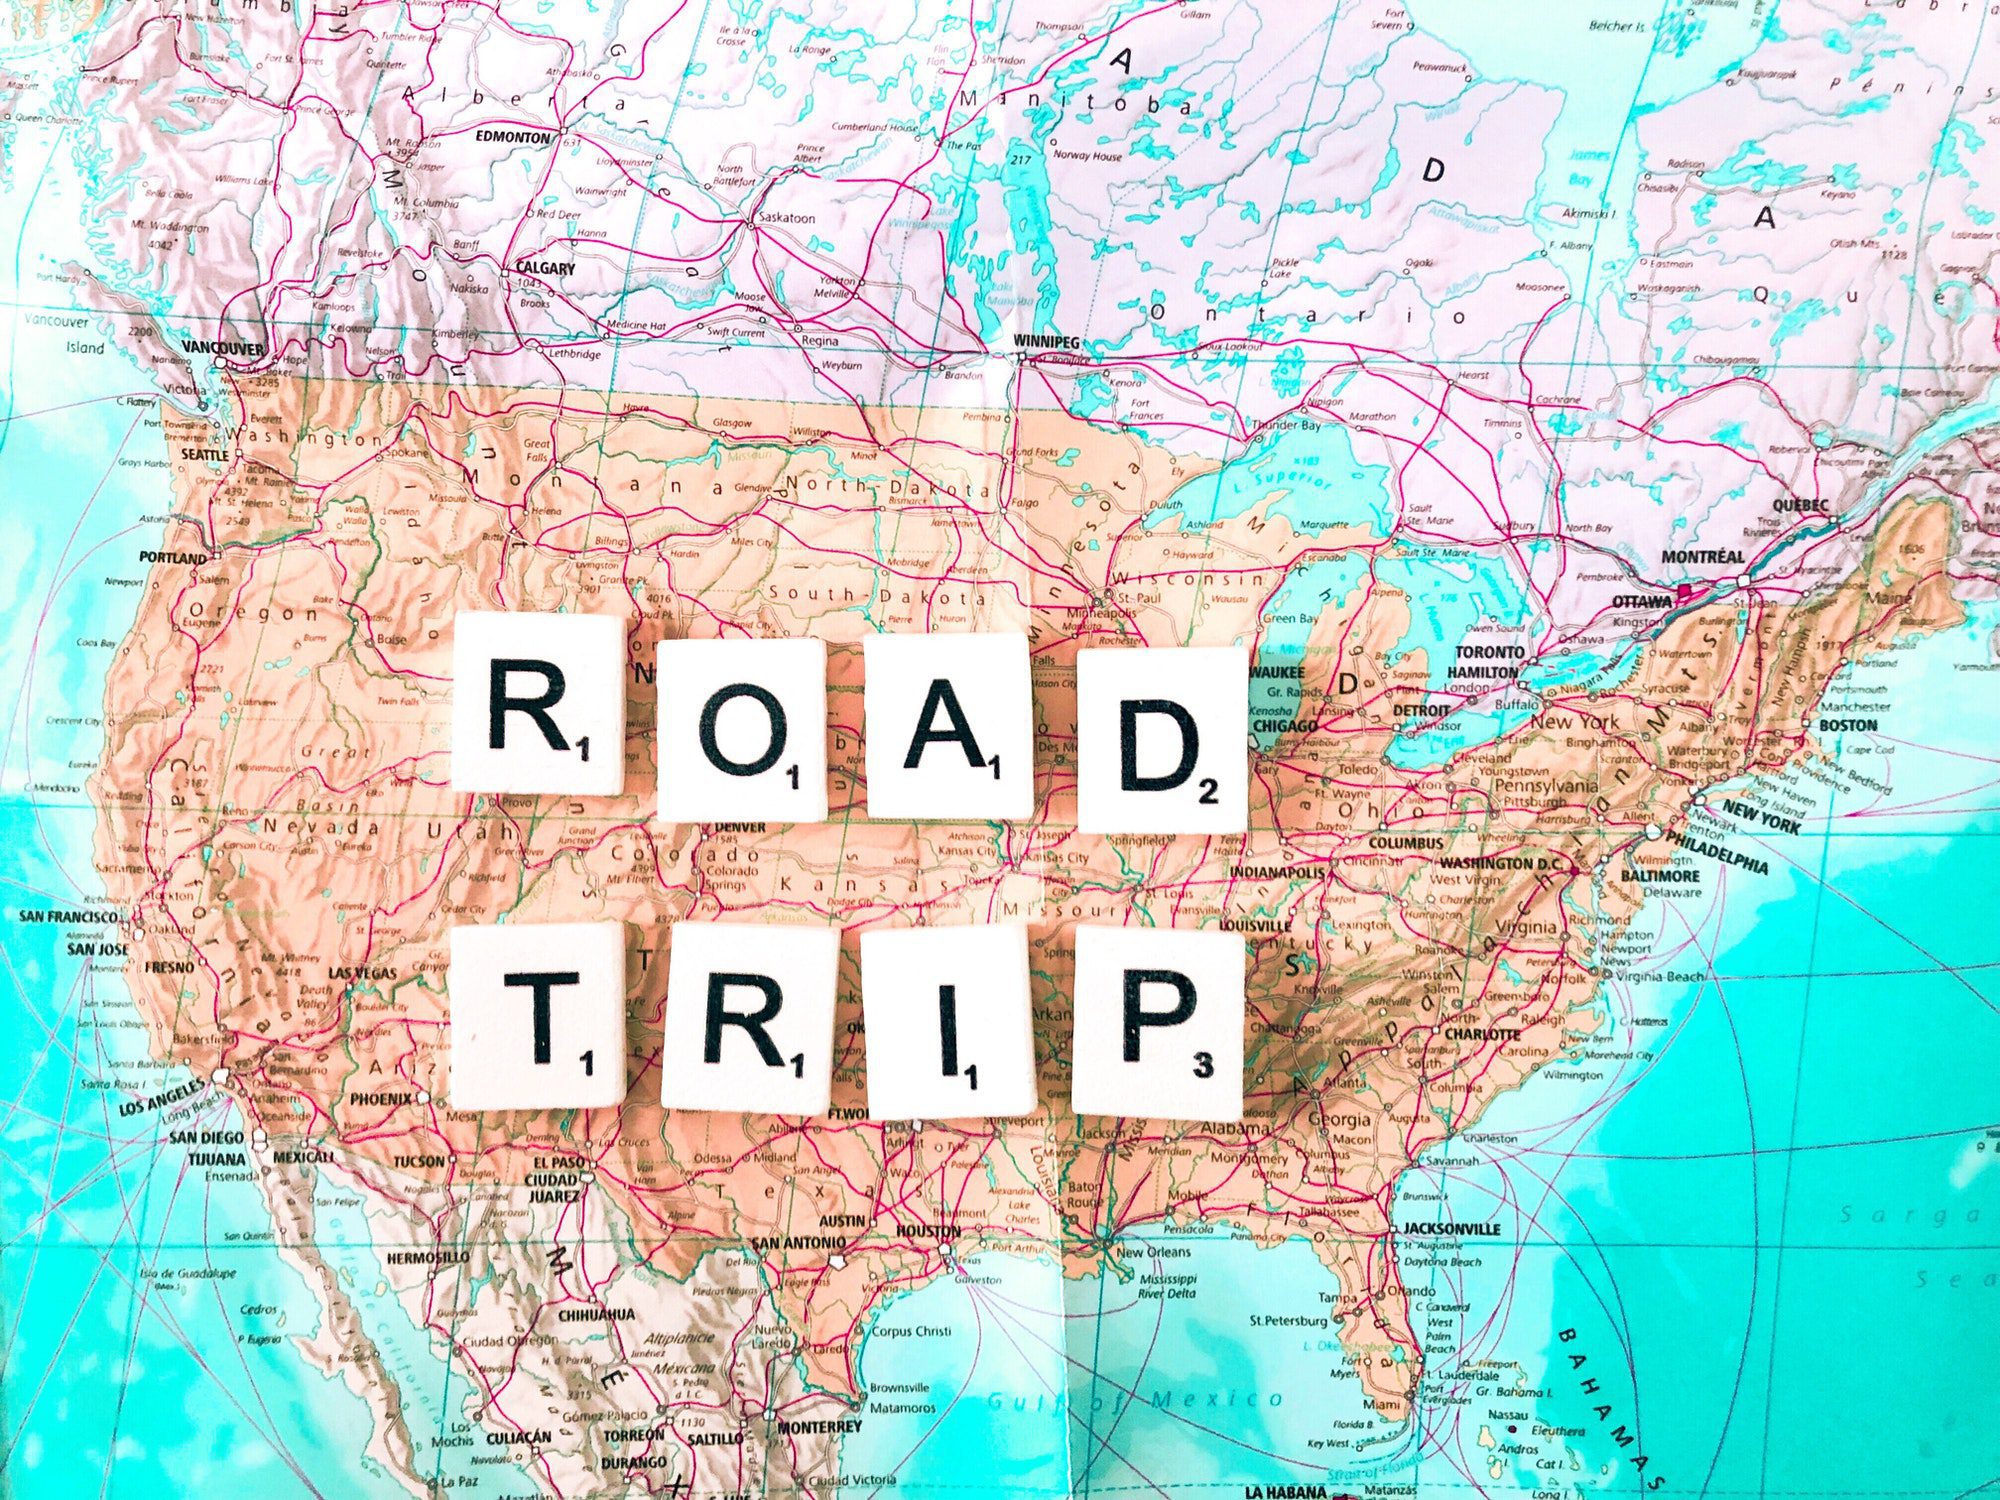 The letters "Road Trip" spelled out on a map of the United States